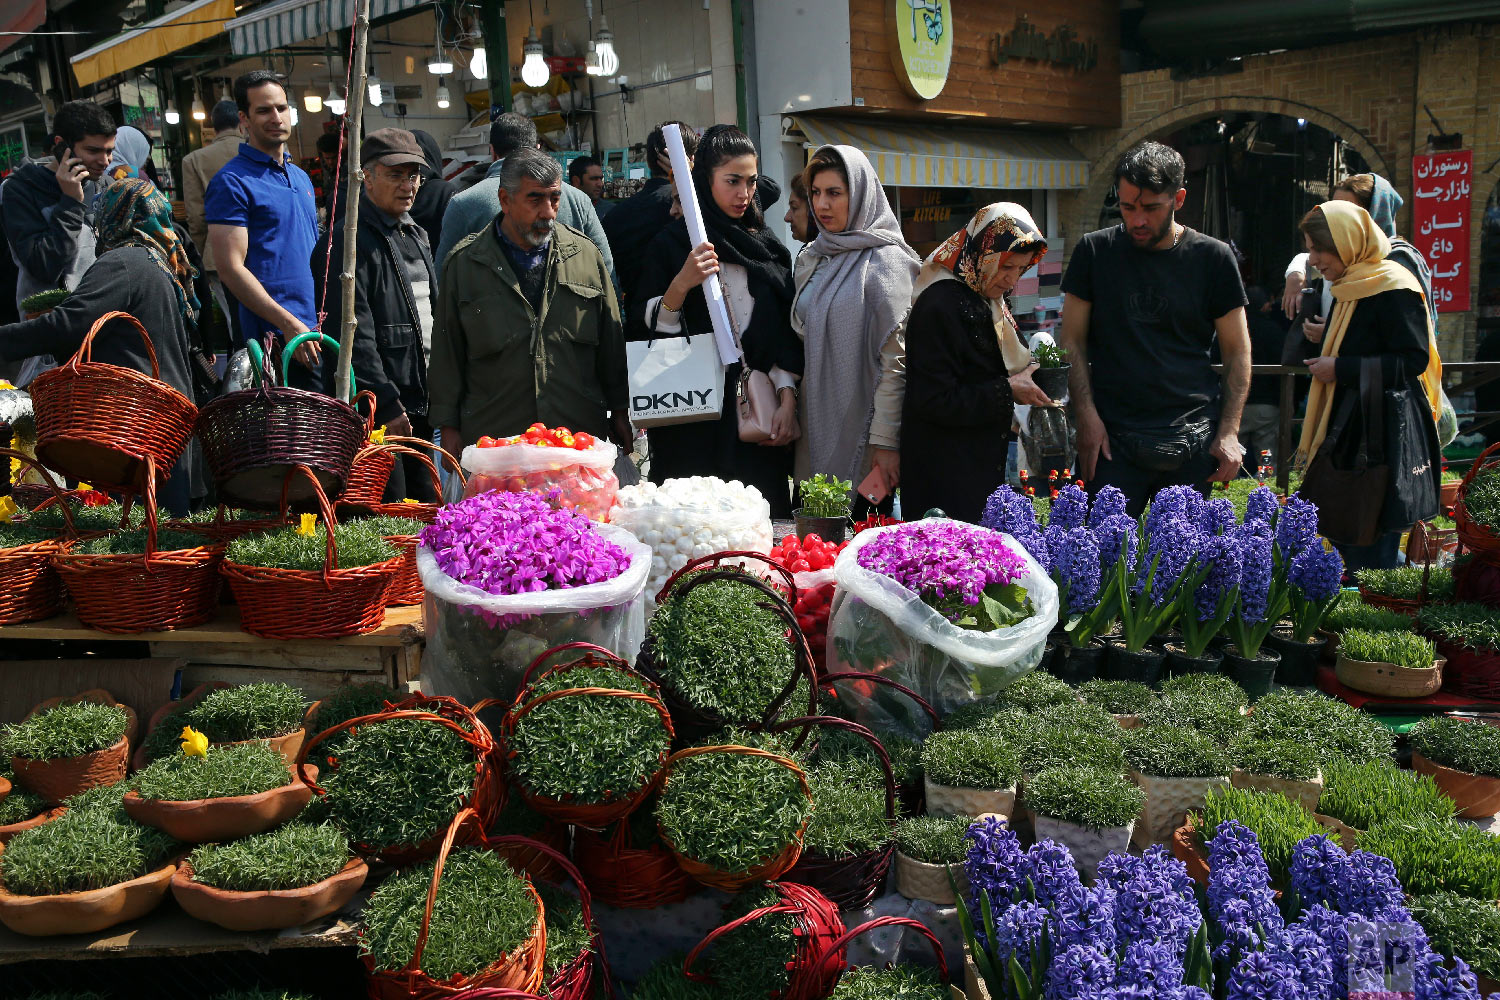  In this Monday, March 19, 2018 photo, Iranians shop for hyacinths, garlic, sprouts and other items used to celebrate the Iranian New Year, ahead of the holiday, at the Tajrish traditional bazaar in northern Tehran, Iran. (AP Photo/Vahid Salemi) 